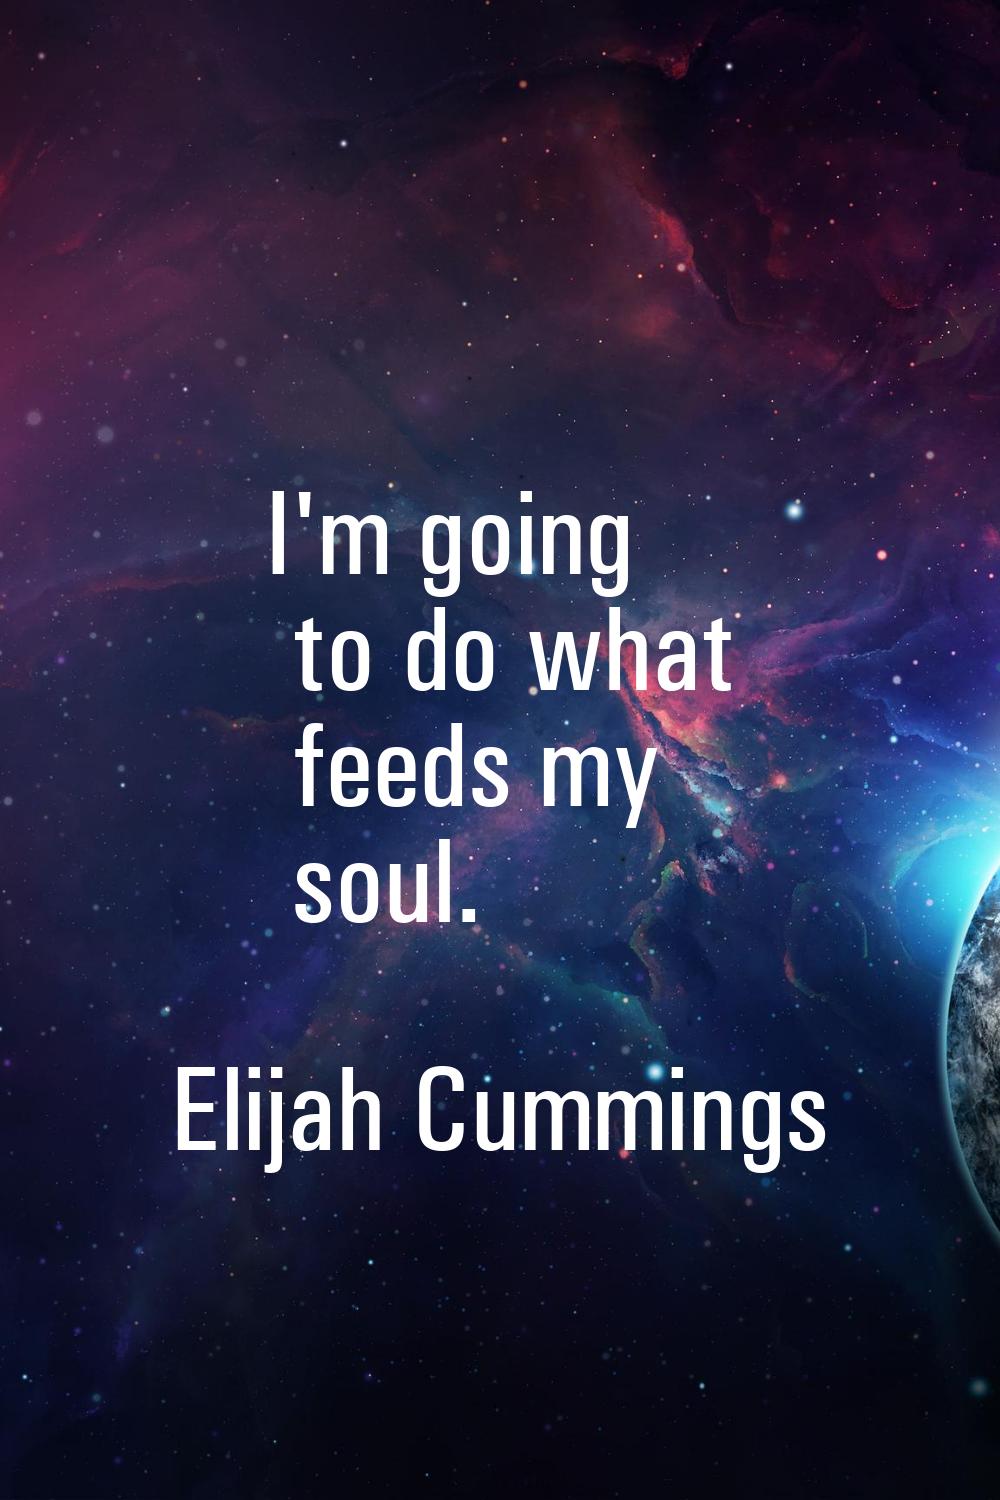 I'm going to do what feeds my soul.